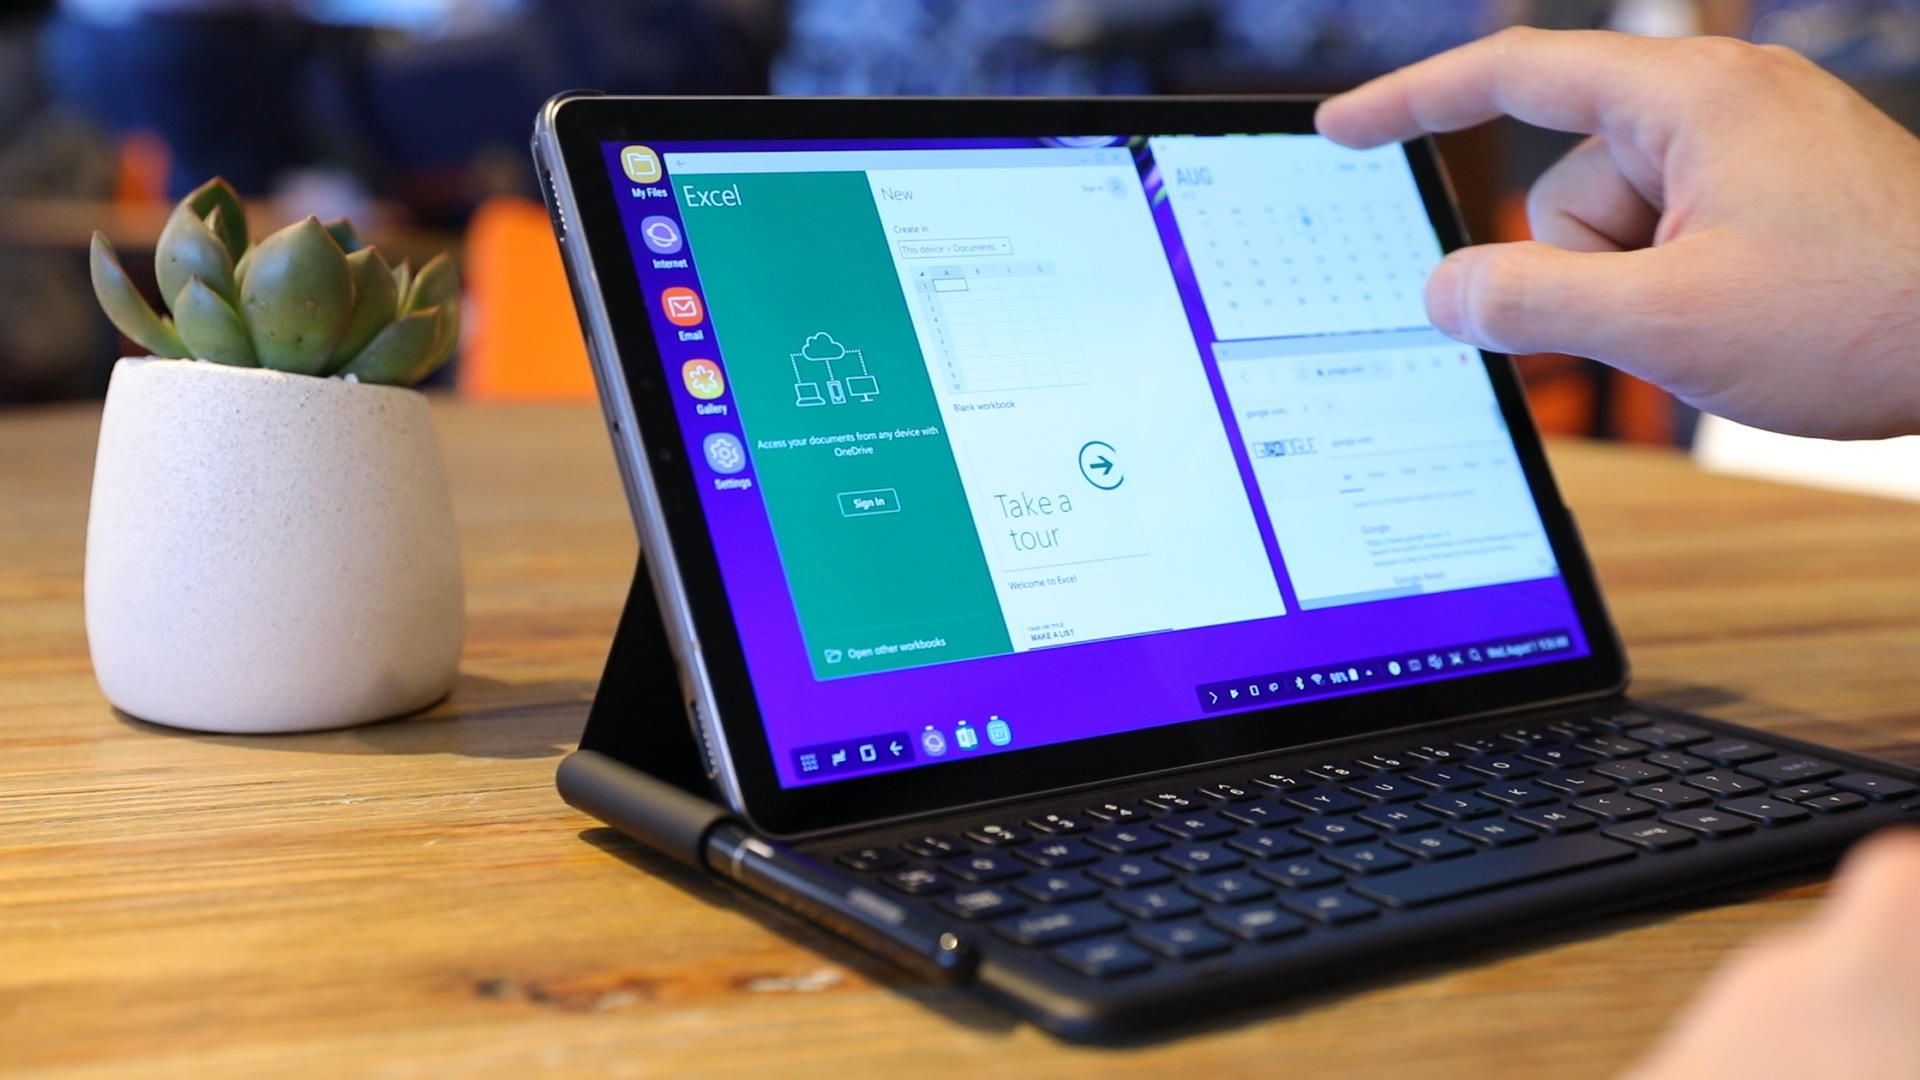 How to fix Samsung Galaxy Tab S4 10.5 battery life problems